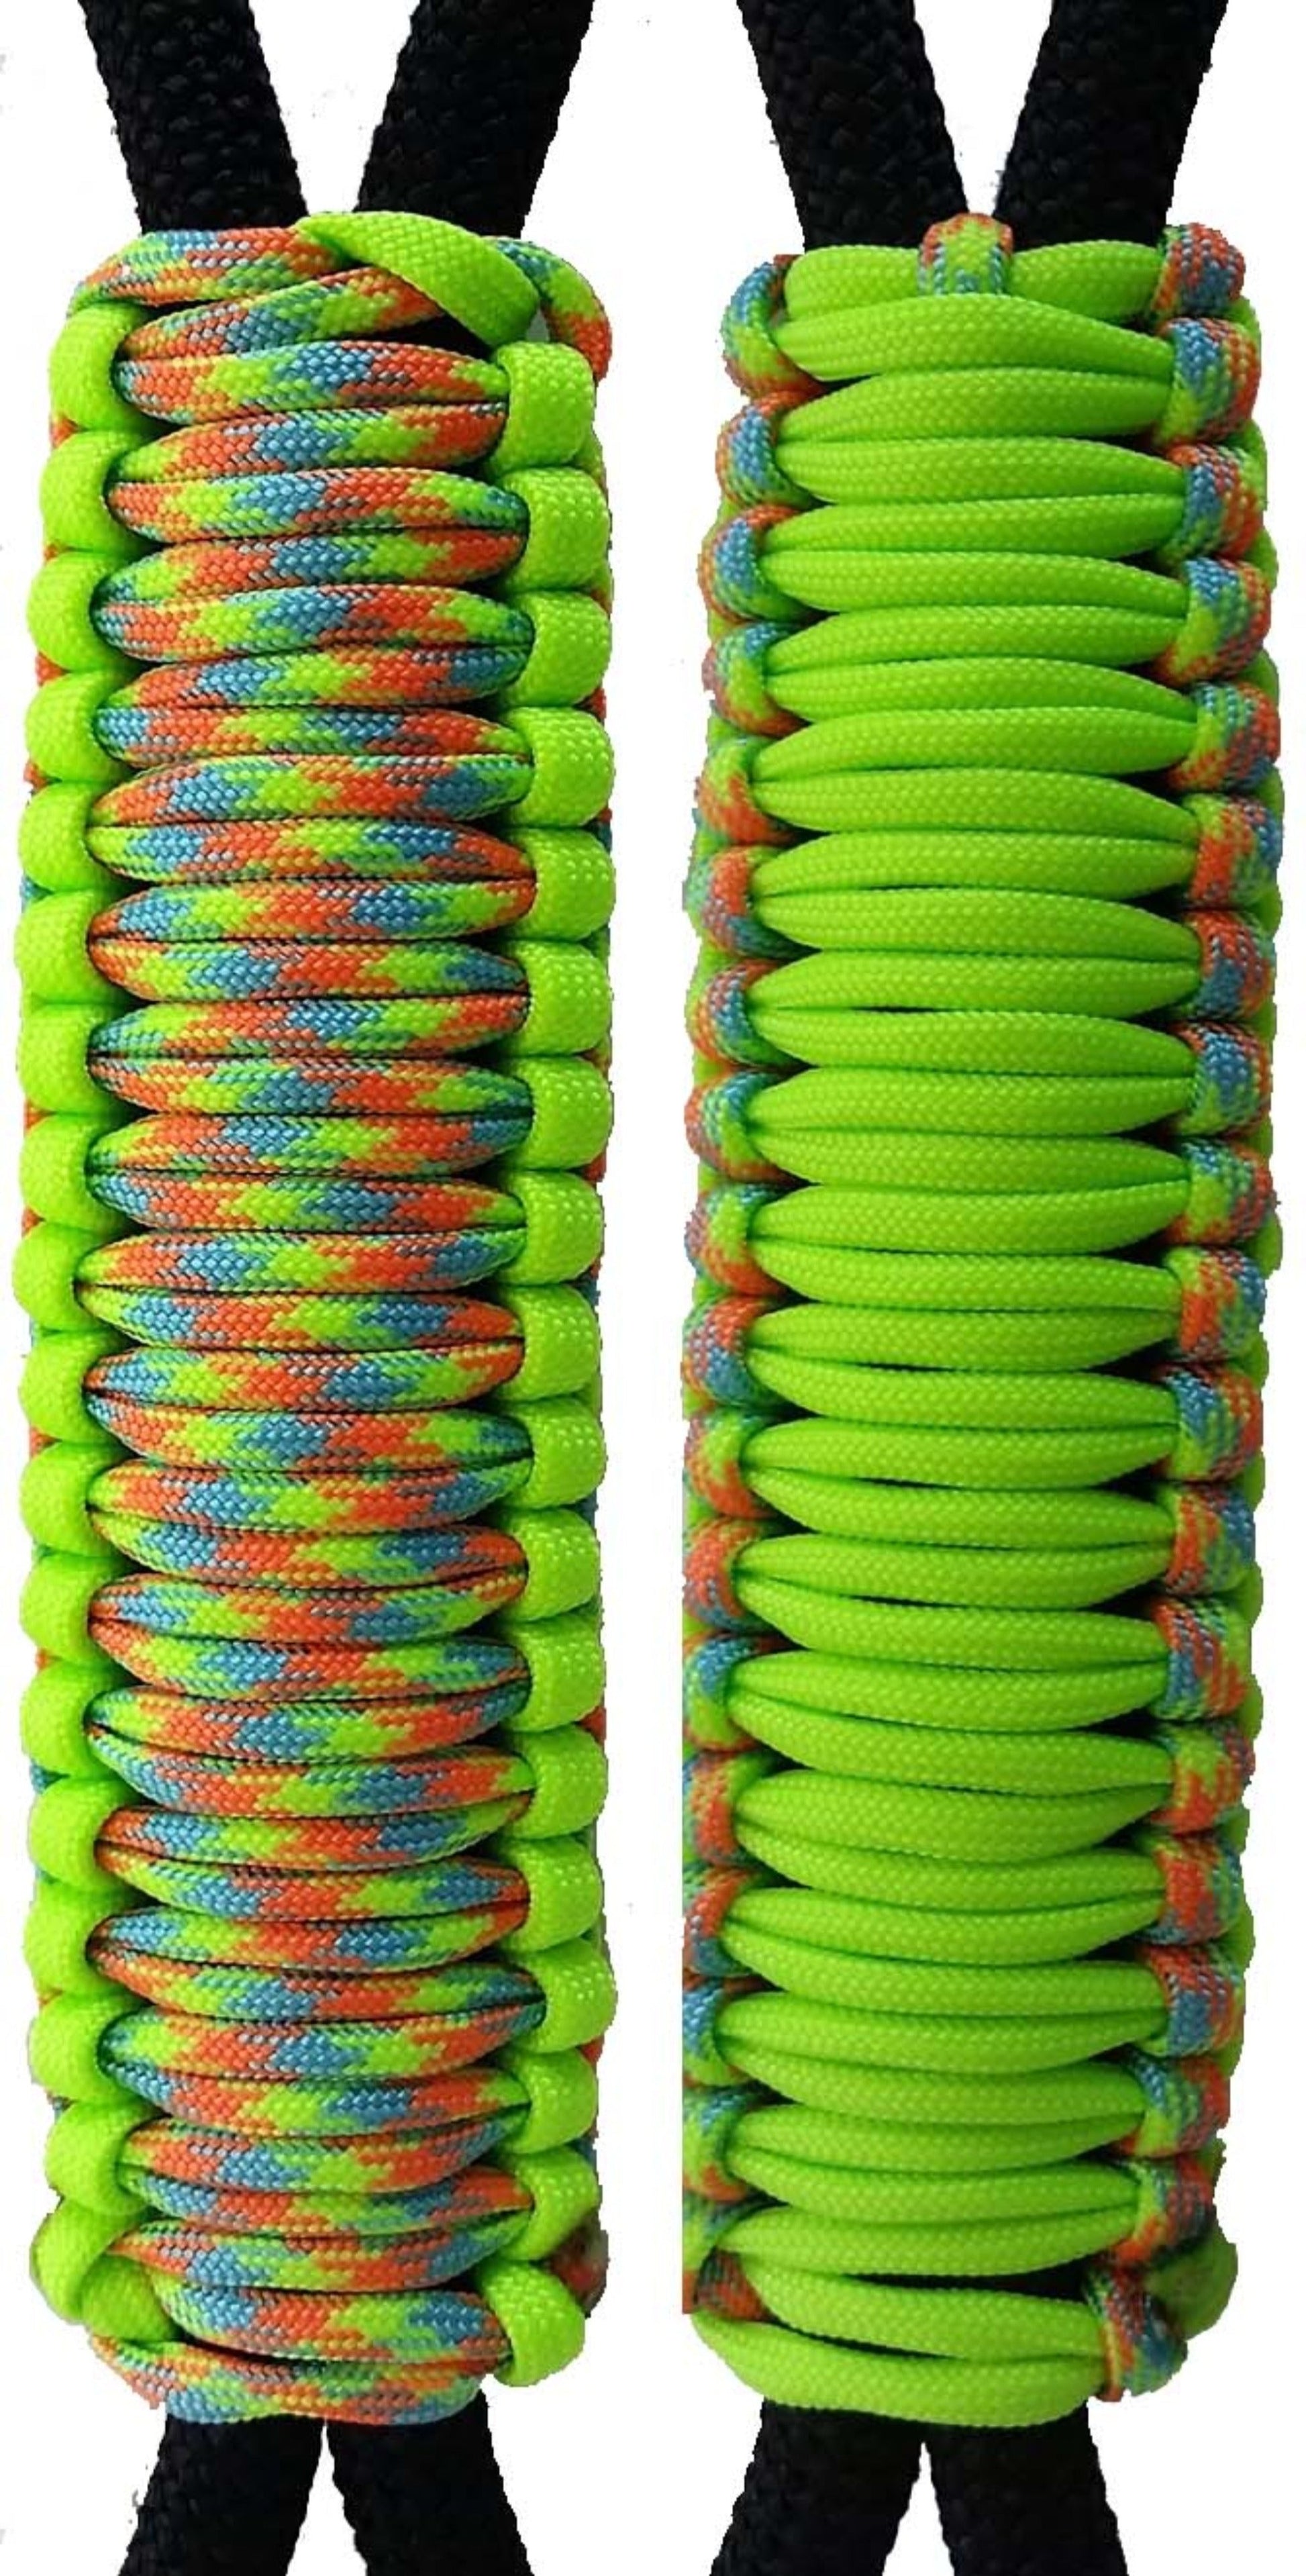 Dragonfly & Neon Green  C023C072 - Paracord Handmade Handles for Stainless Steel Tumblers - Made in USA!